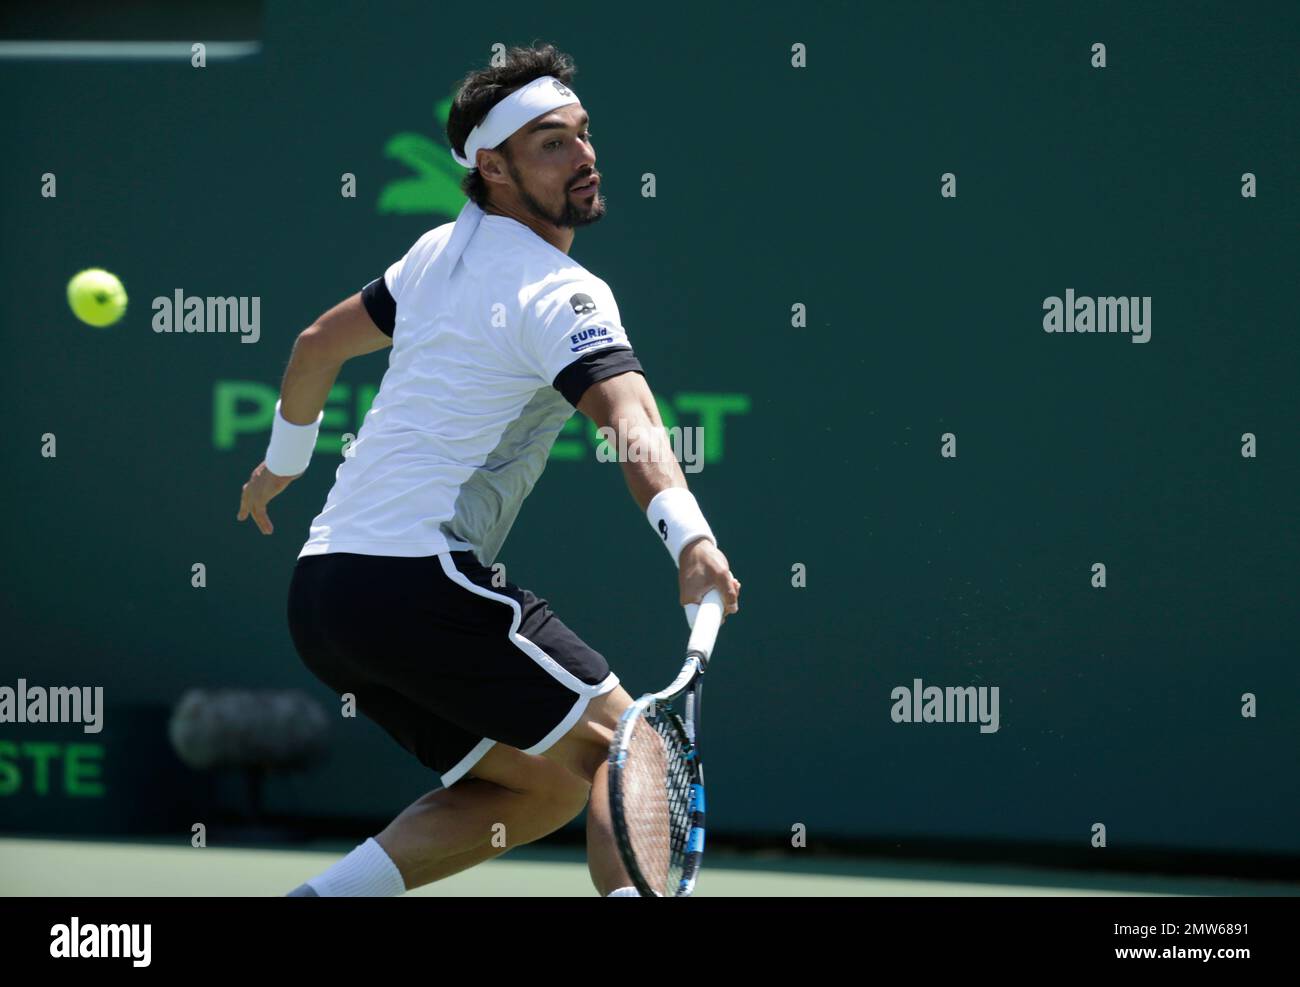 Fabio Fognini, of Italy, hits a return to Rafael Nadal, of Spain, during a mens semifinal match at the Miami Open tennis tournament, Friday, March 31, 2017, in Key Biscayne, Fla